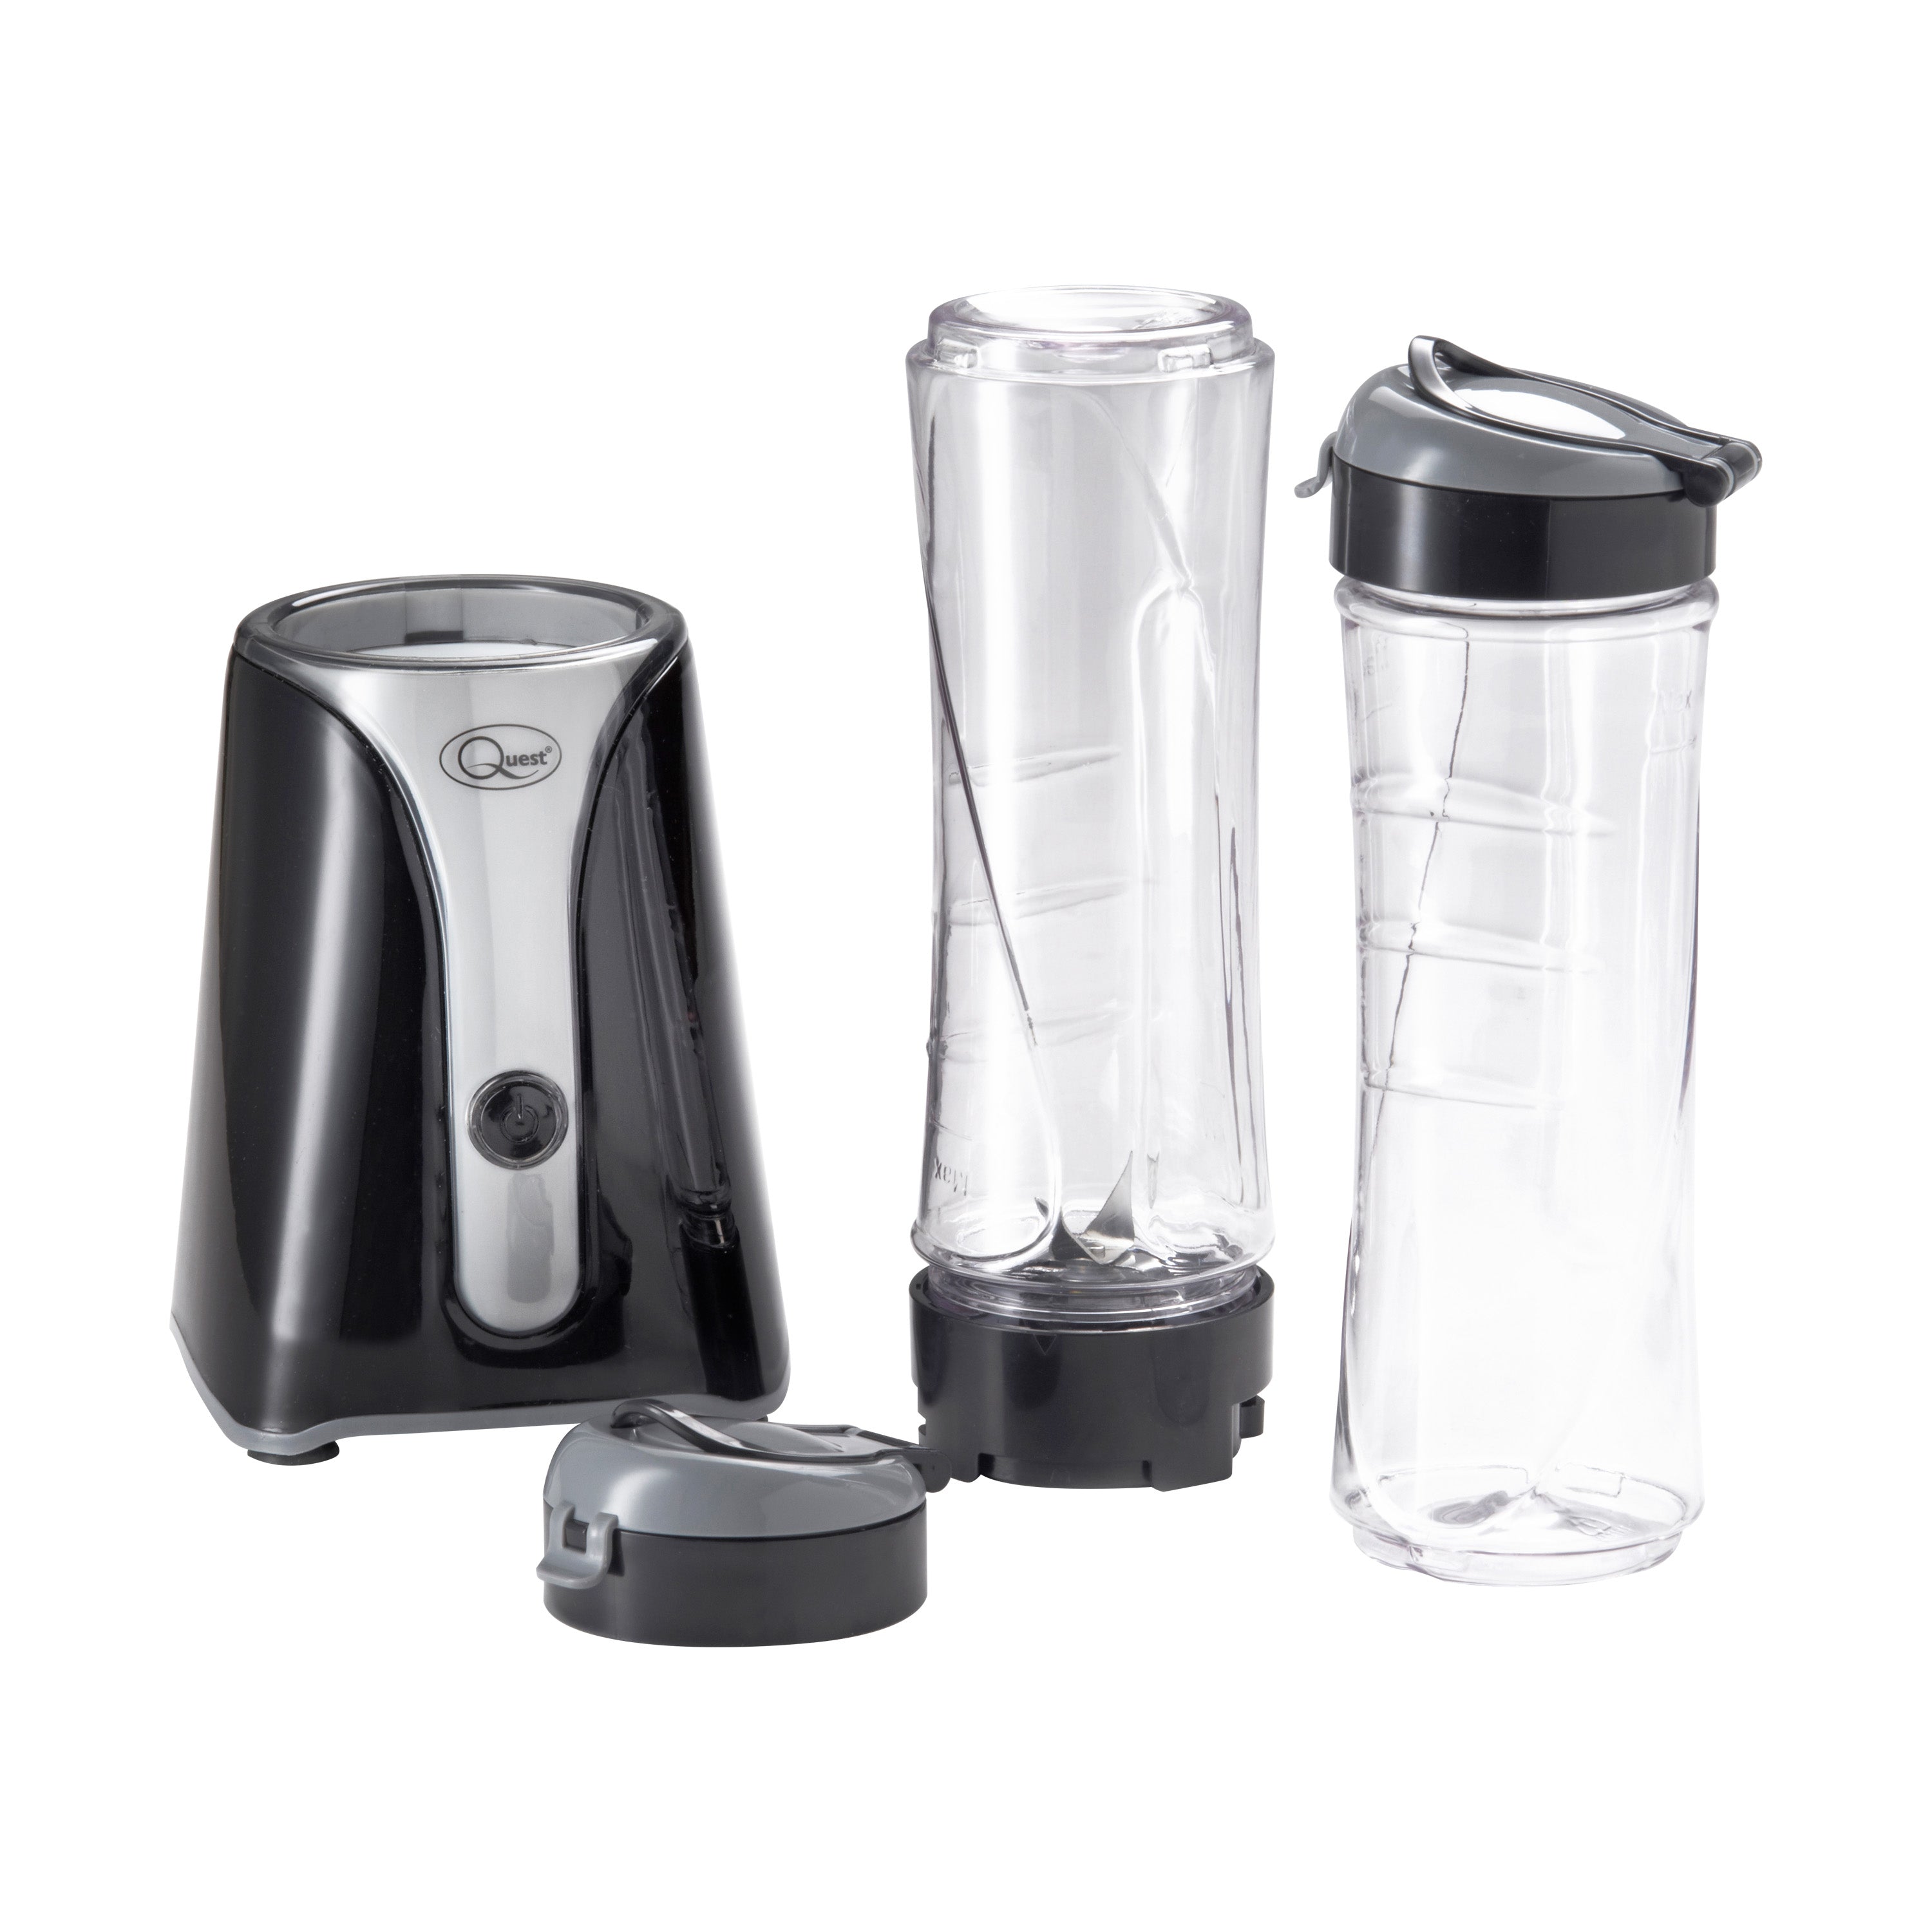 Quest Fruit Personal Blender Black W/ Take Away Carry Cup & Ice Crushing Blades  | TJ Hughes